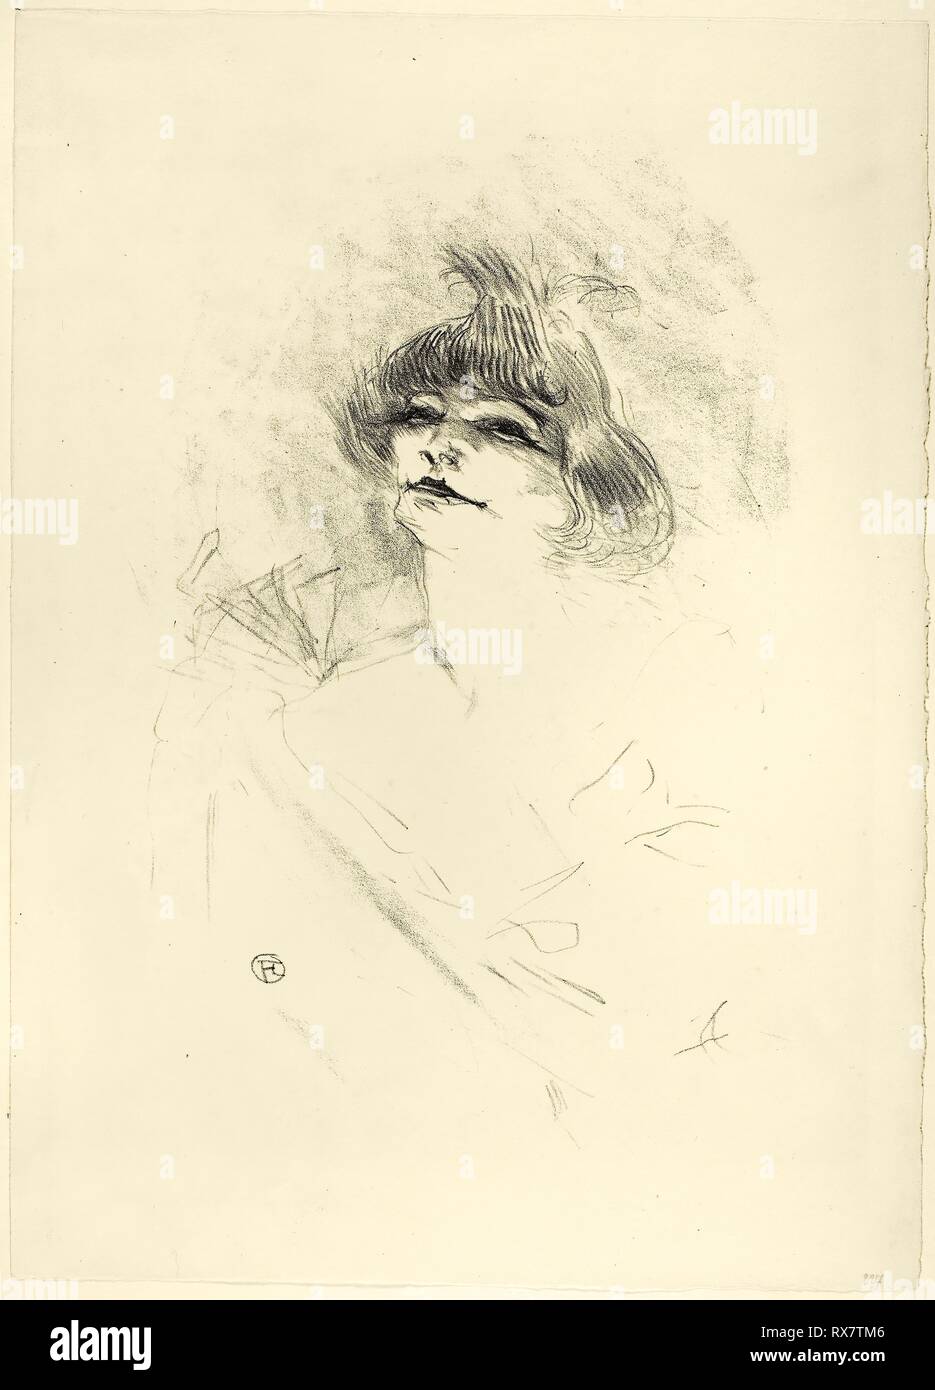 Polaire. Henri de Toulouse-Lautrec; French, 1864-1901. Date: 1898.  Dimensions: 344 × 228 mm (image); 432 × 311 mm (sheet). Lithograph on cream  wove paper. Origin: France. Museum: The Chicago Art Institute Stock Photo -  Alamy